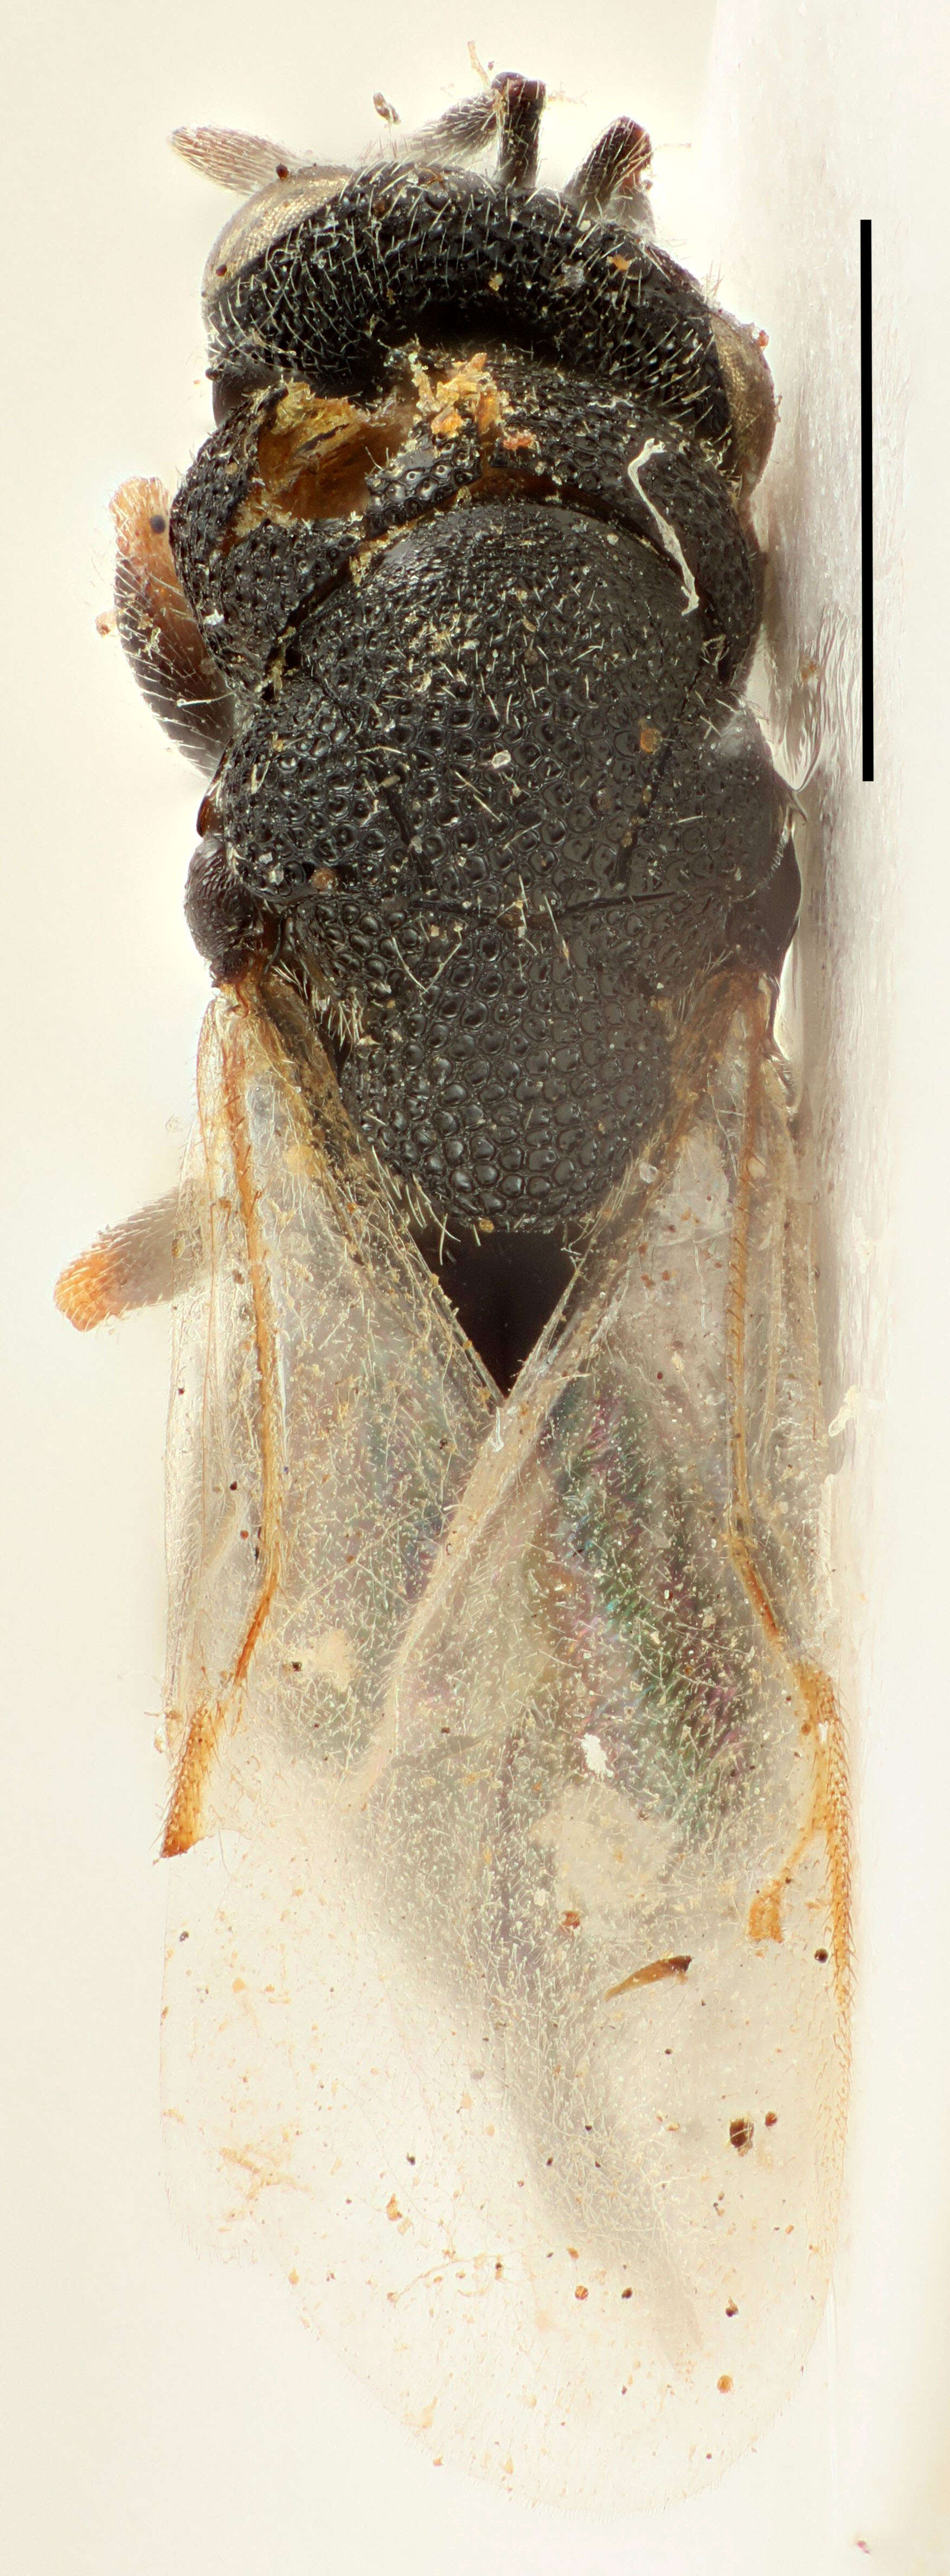 Image of seed chalcids